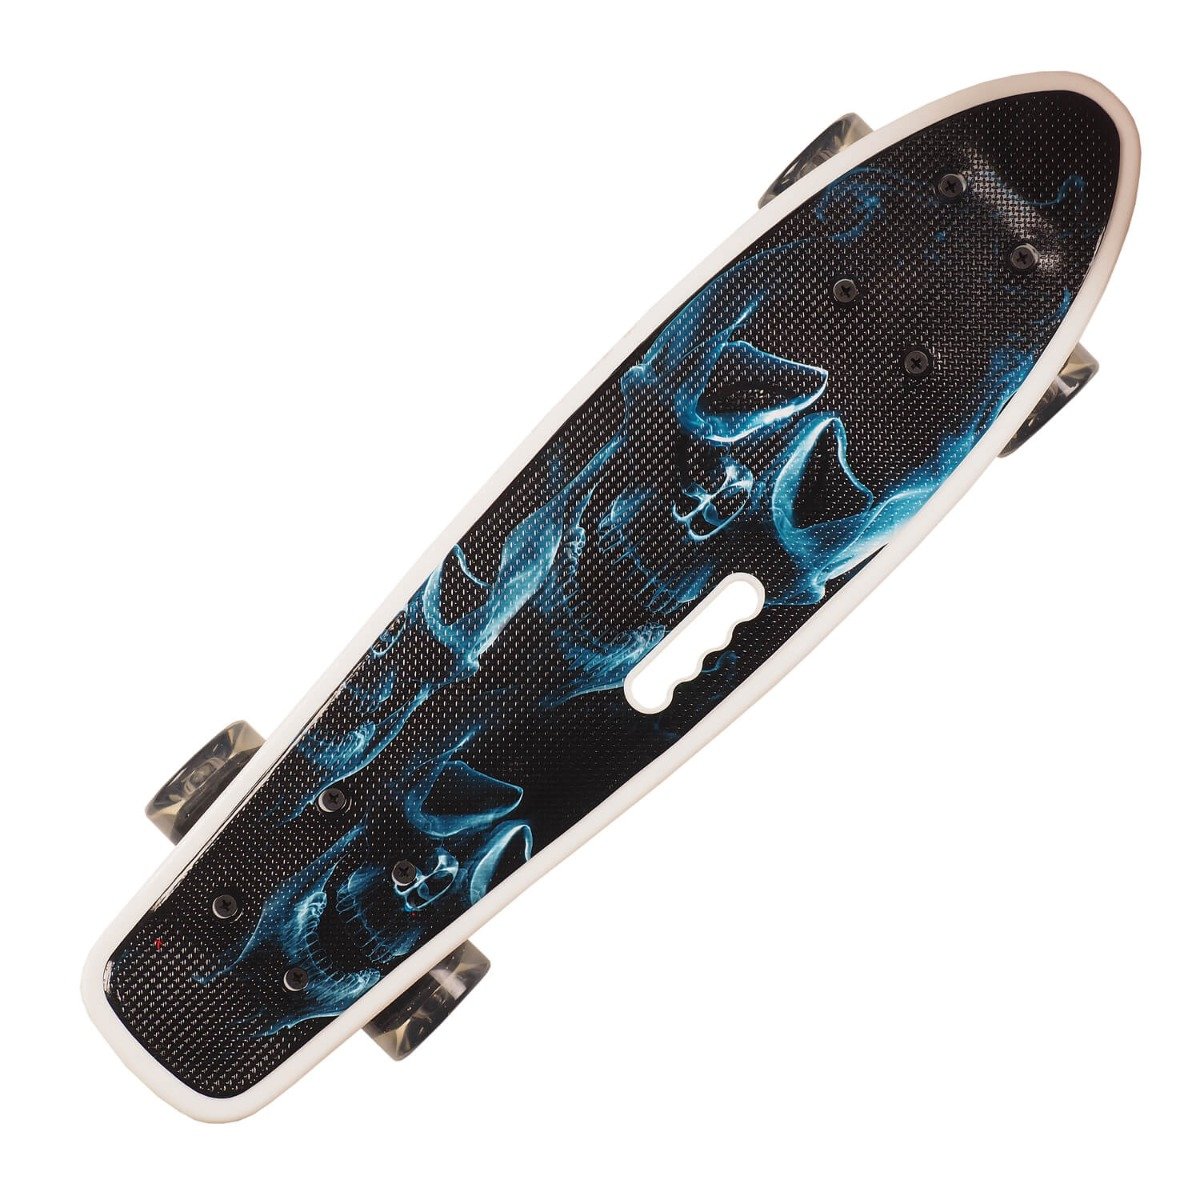 Penny board portabil Action One, Smoke, 22 inch Action One imagine 2022